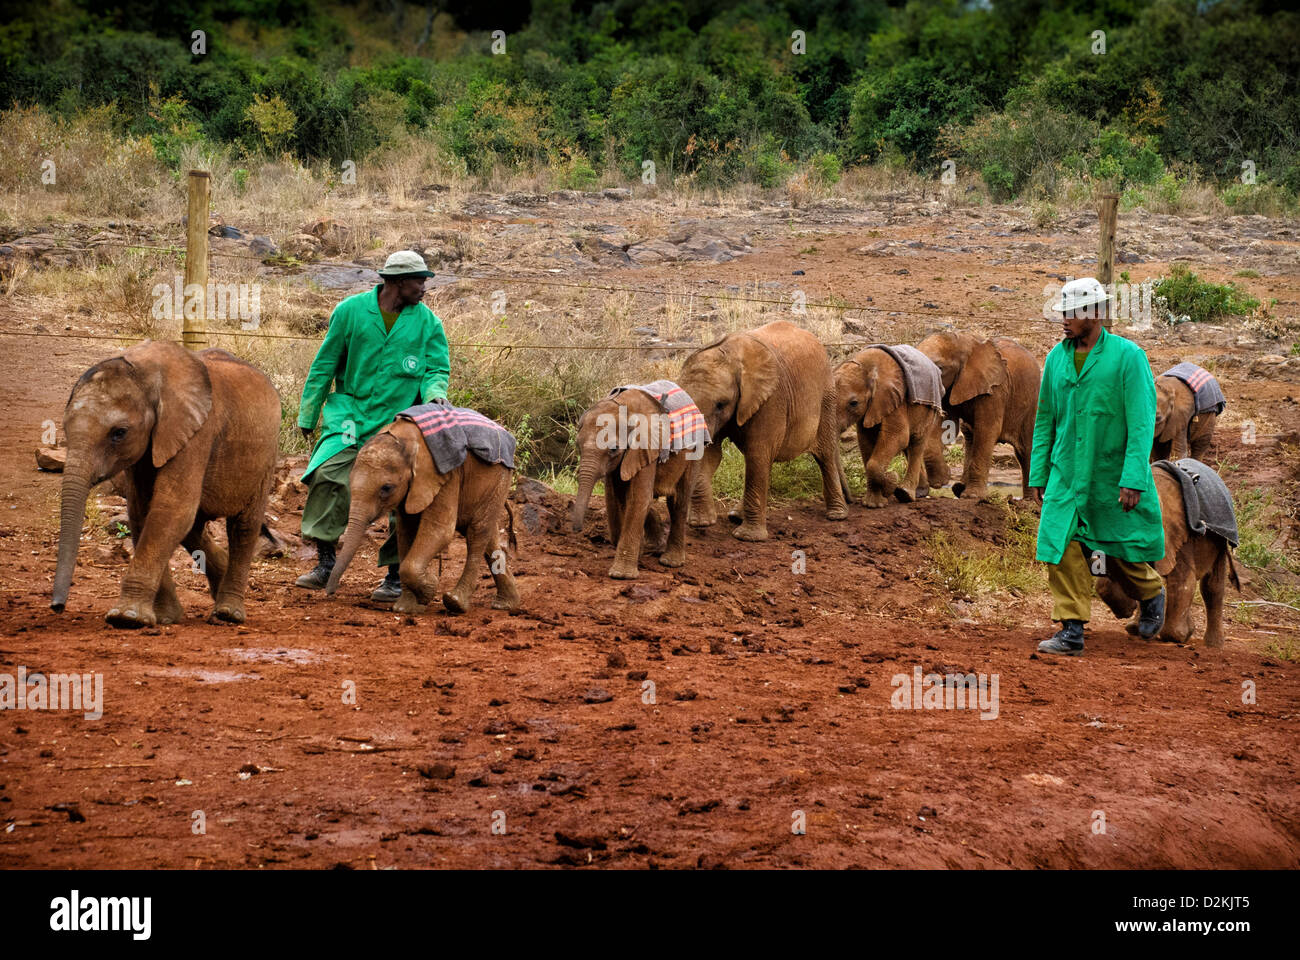 Keepers at the Sheldrick Elephant Orphanage bringing rescued orphan elephant babies to meet the public at the waterhole, Kenya Stock Photo